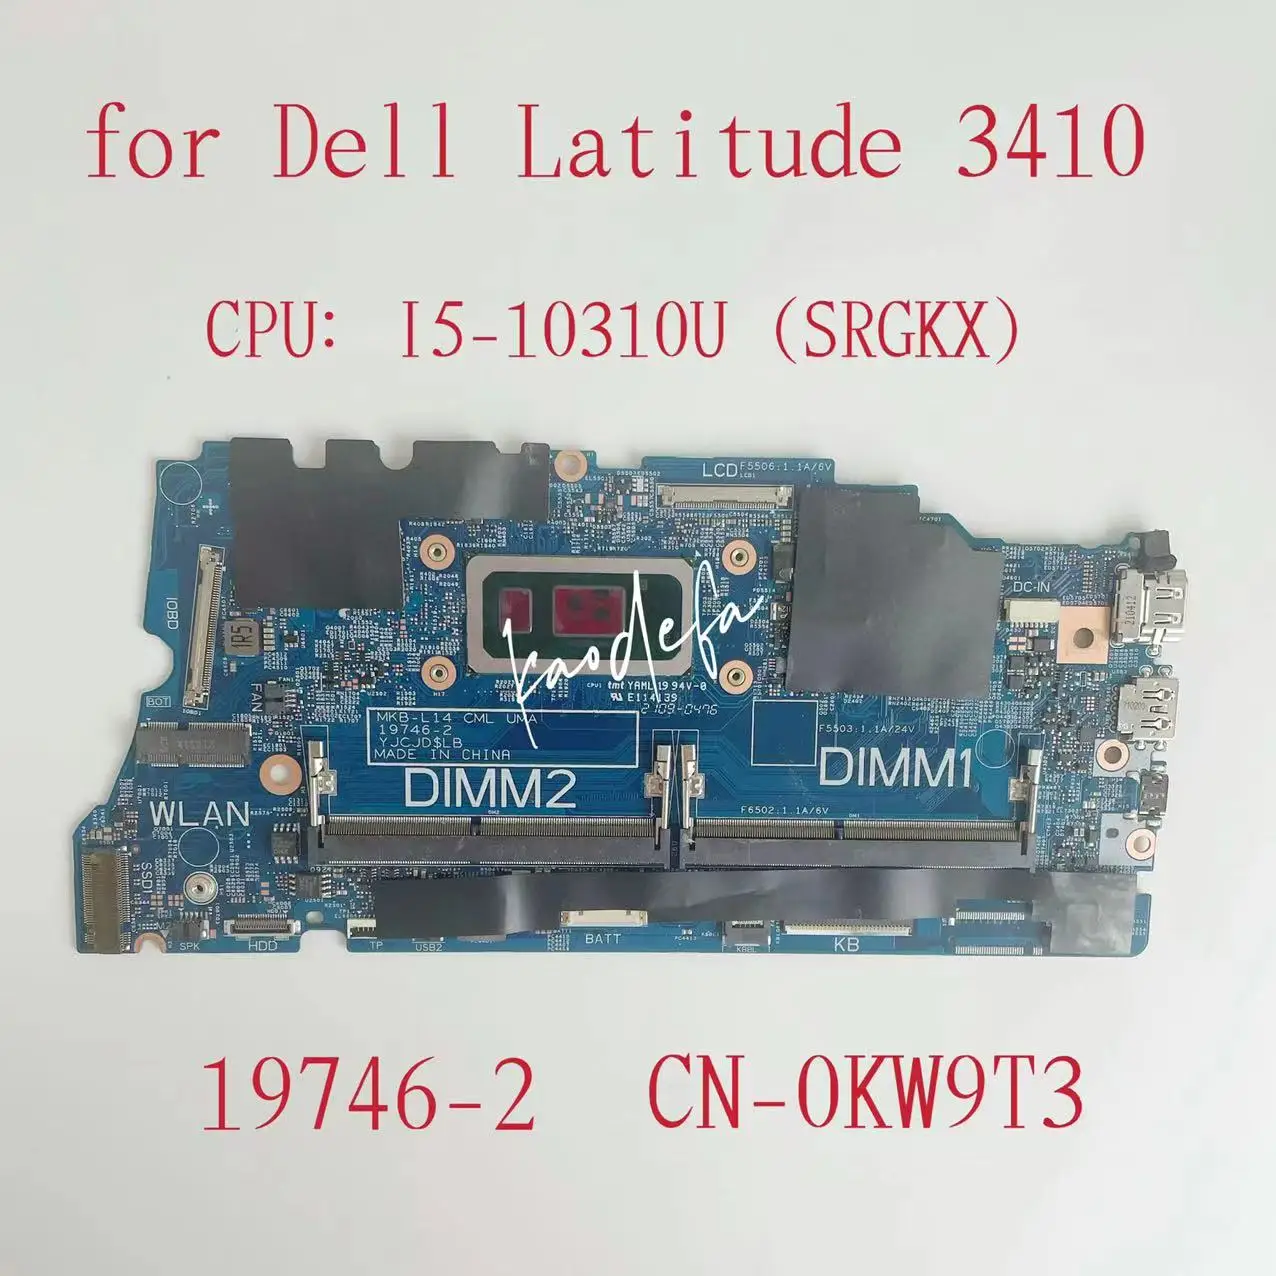 

19746-2 Mainboard For DELL Latitude 3410 3510 Laptop Motherboard CPU: I5-10310U SRGKX DDR4 CN-0KW9T3 0KW9T3 KW9T3 Test Ok